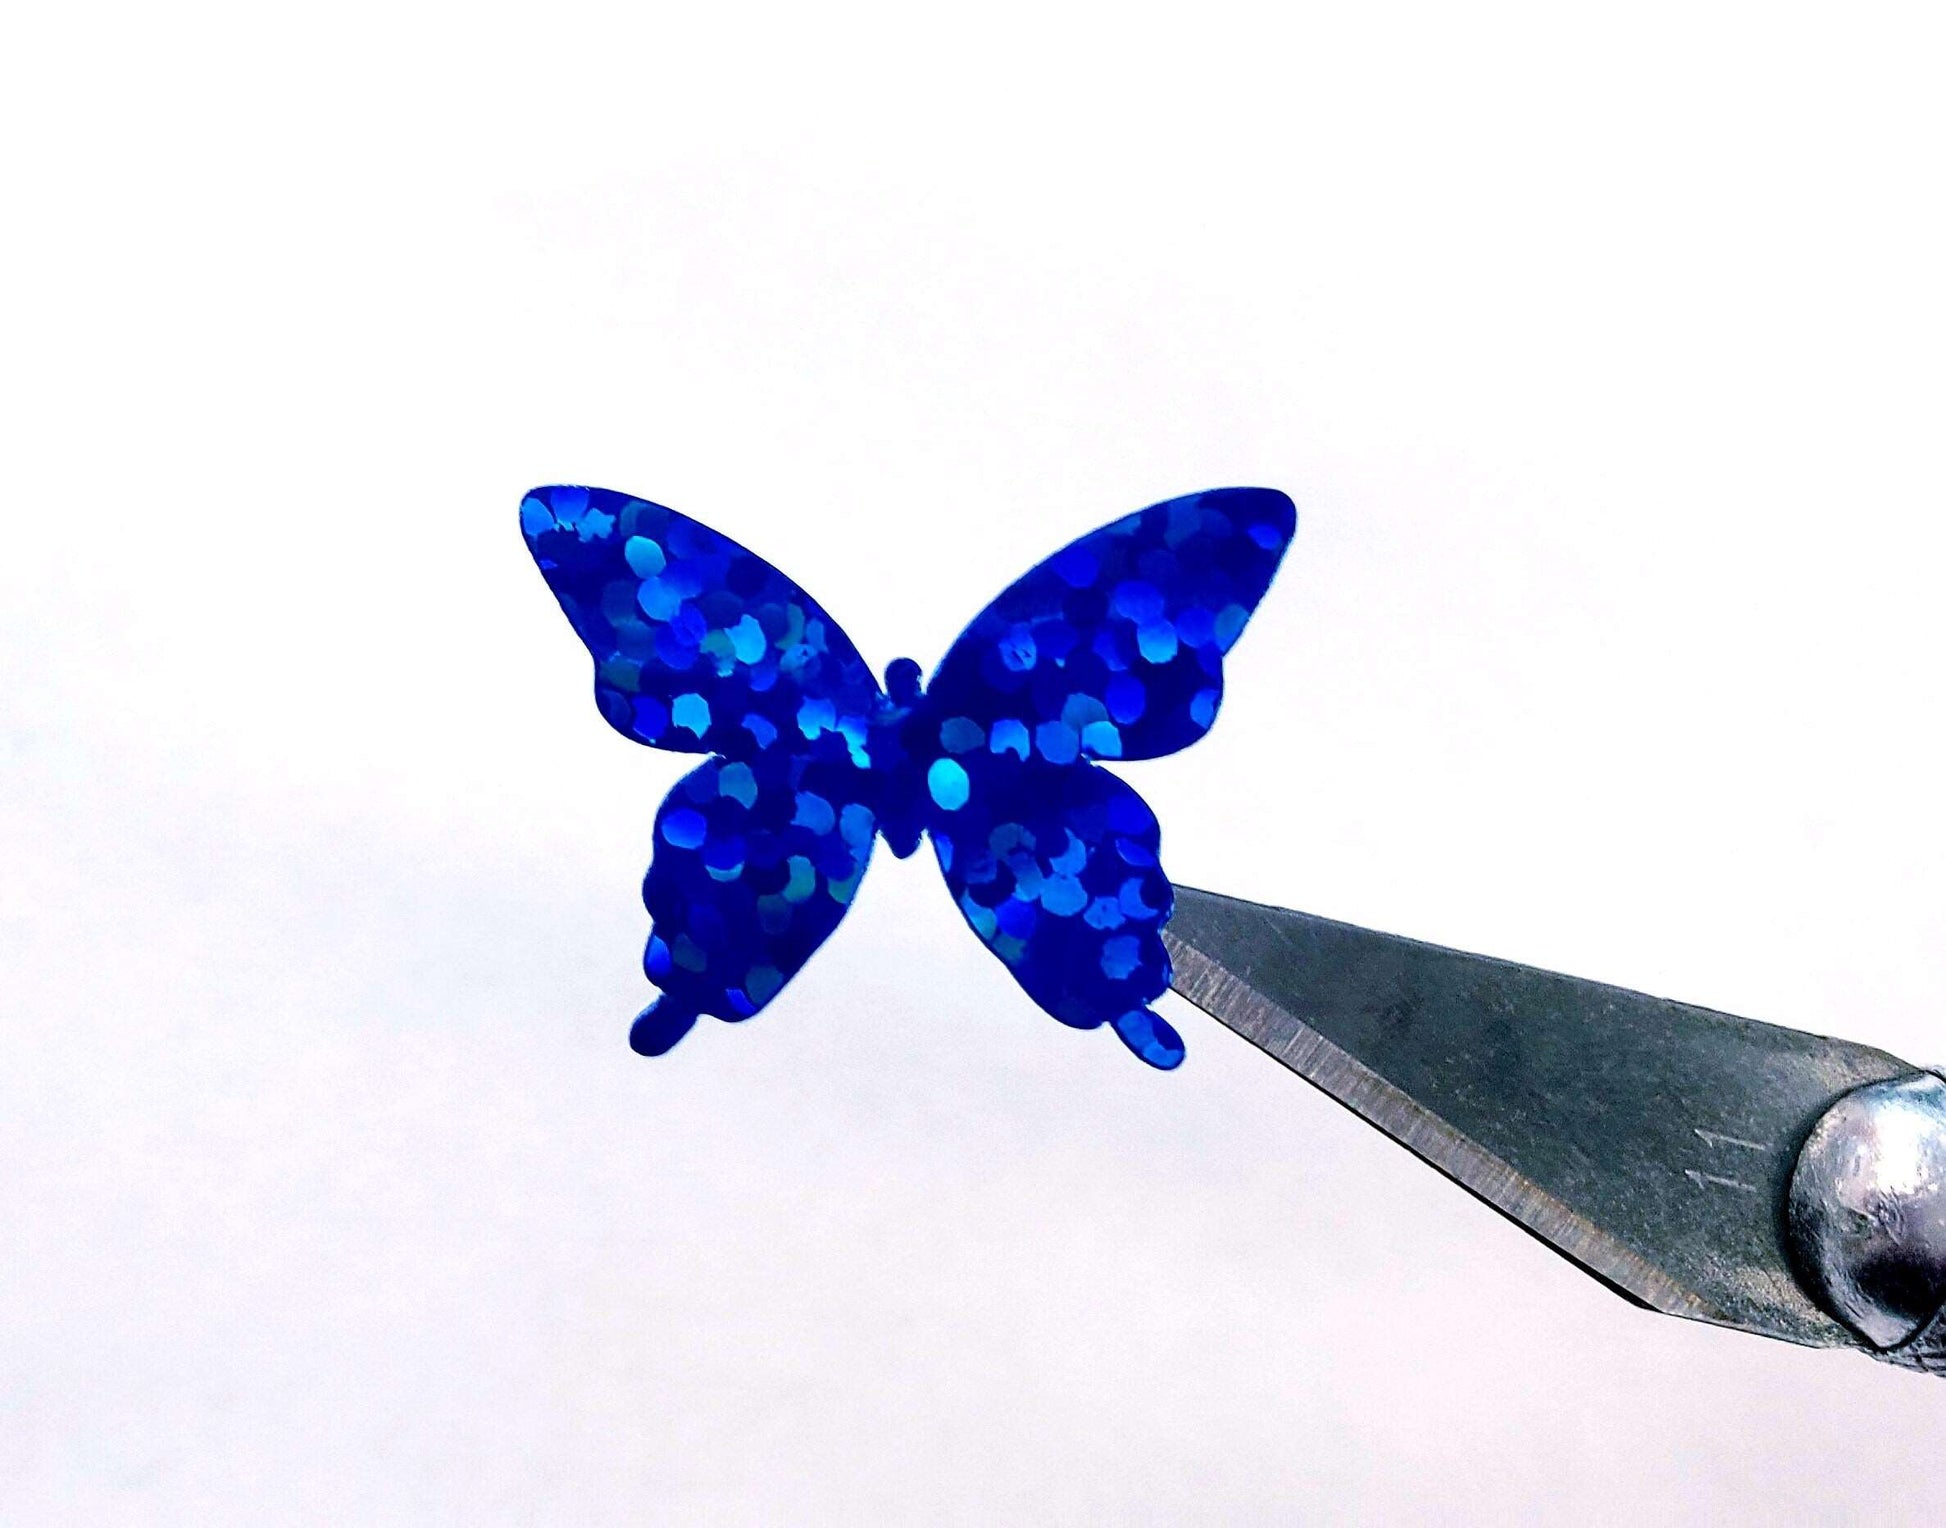 Sparkly Blue Butterfly Stickers. Set of butterflies for planners, envelopes, laptops, crafts and journals.